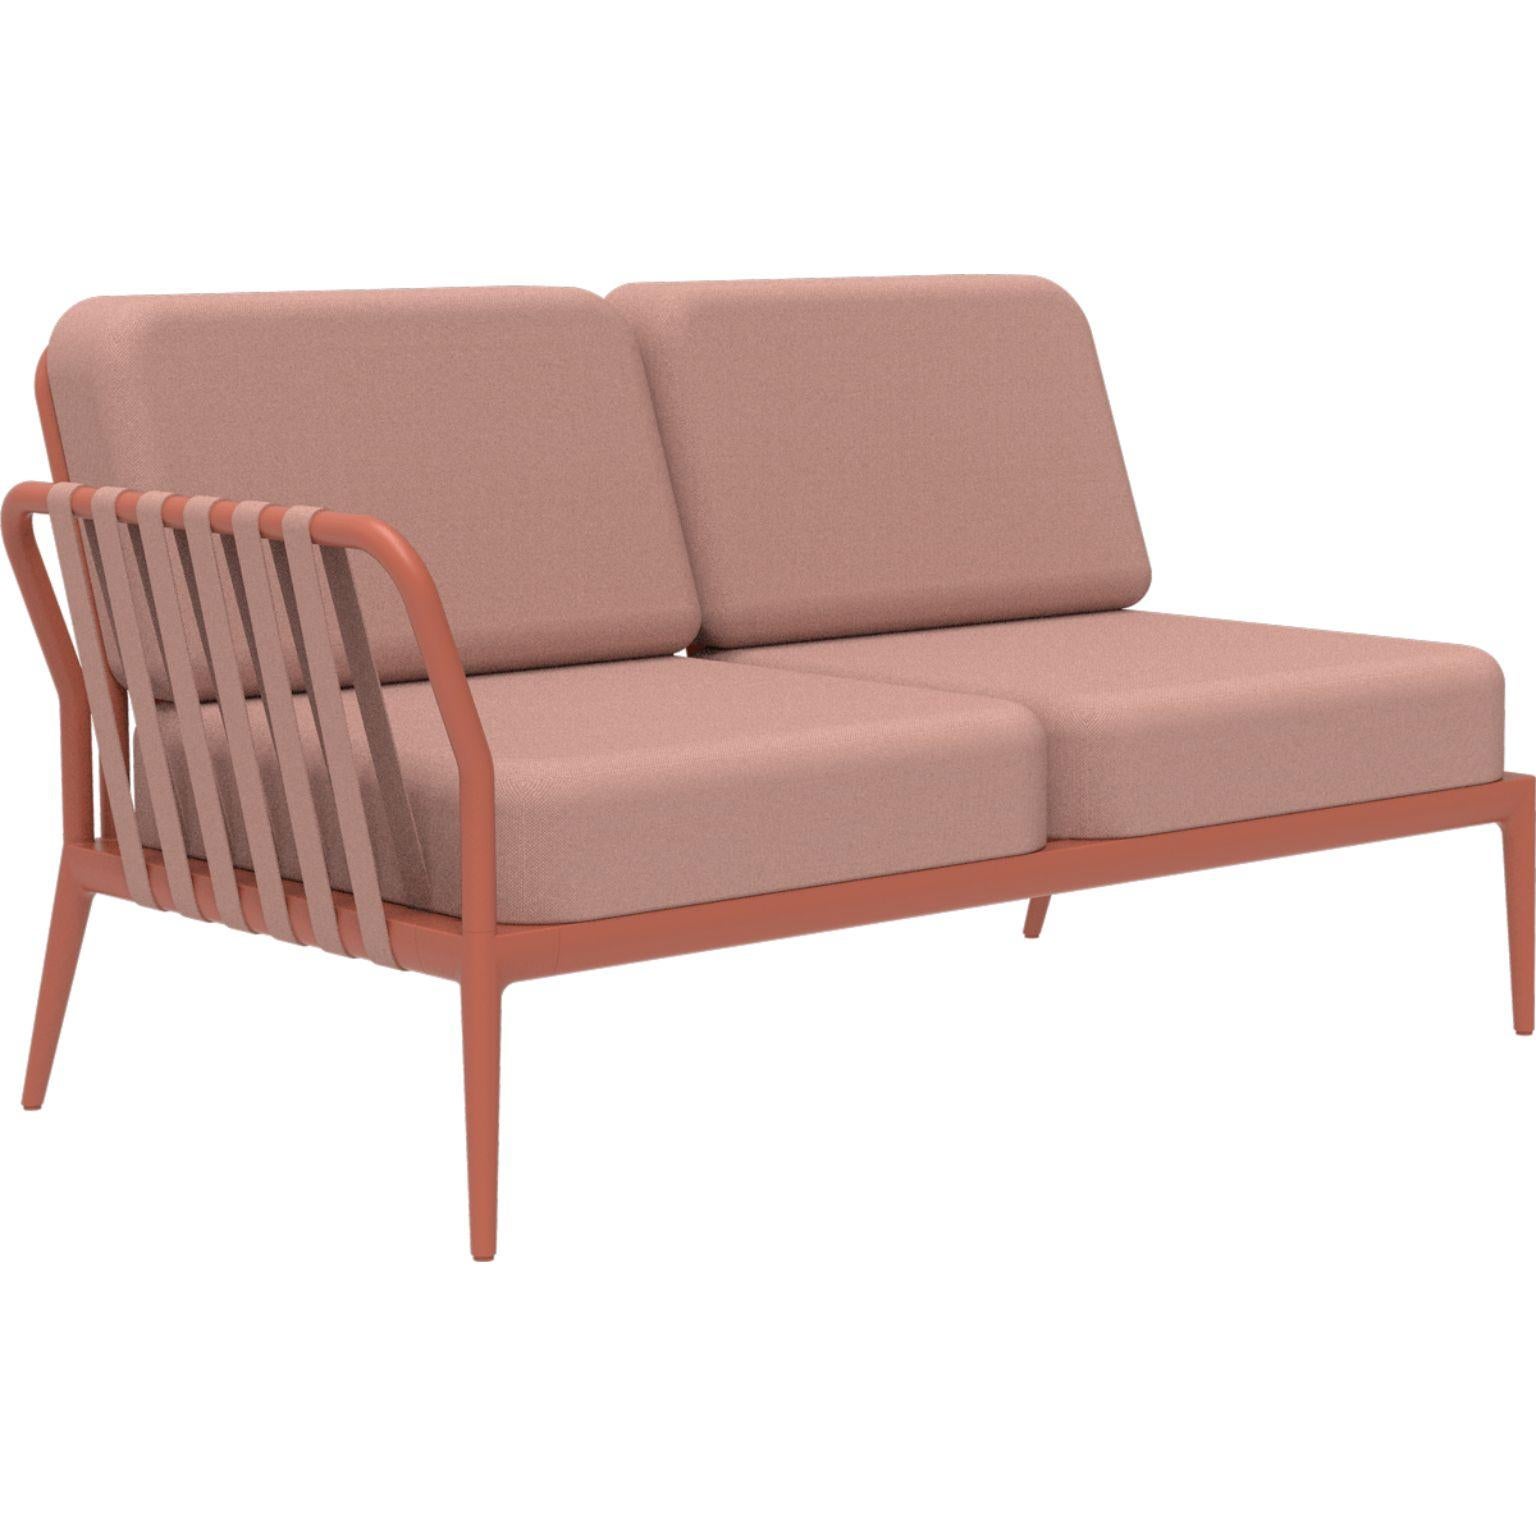 Ribbons Salmon double right modular sofa by Mowee
Dimensions: D83 x W148 x H81 cm (seat height 42 cm).
Material: Aluminium and upholstery.
Weight: 29 kg
Also available in different colors and finishes.

An unmistakable collection for its